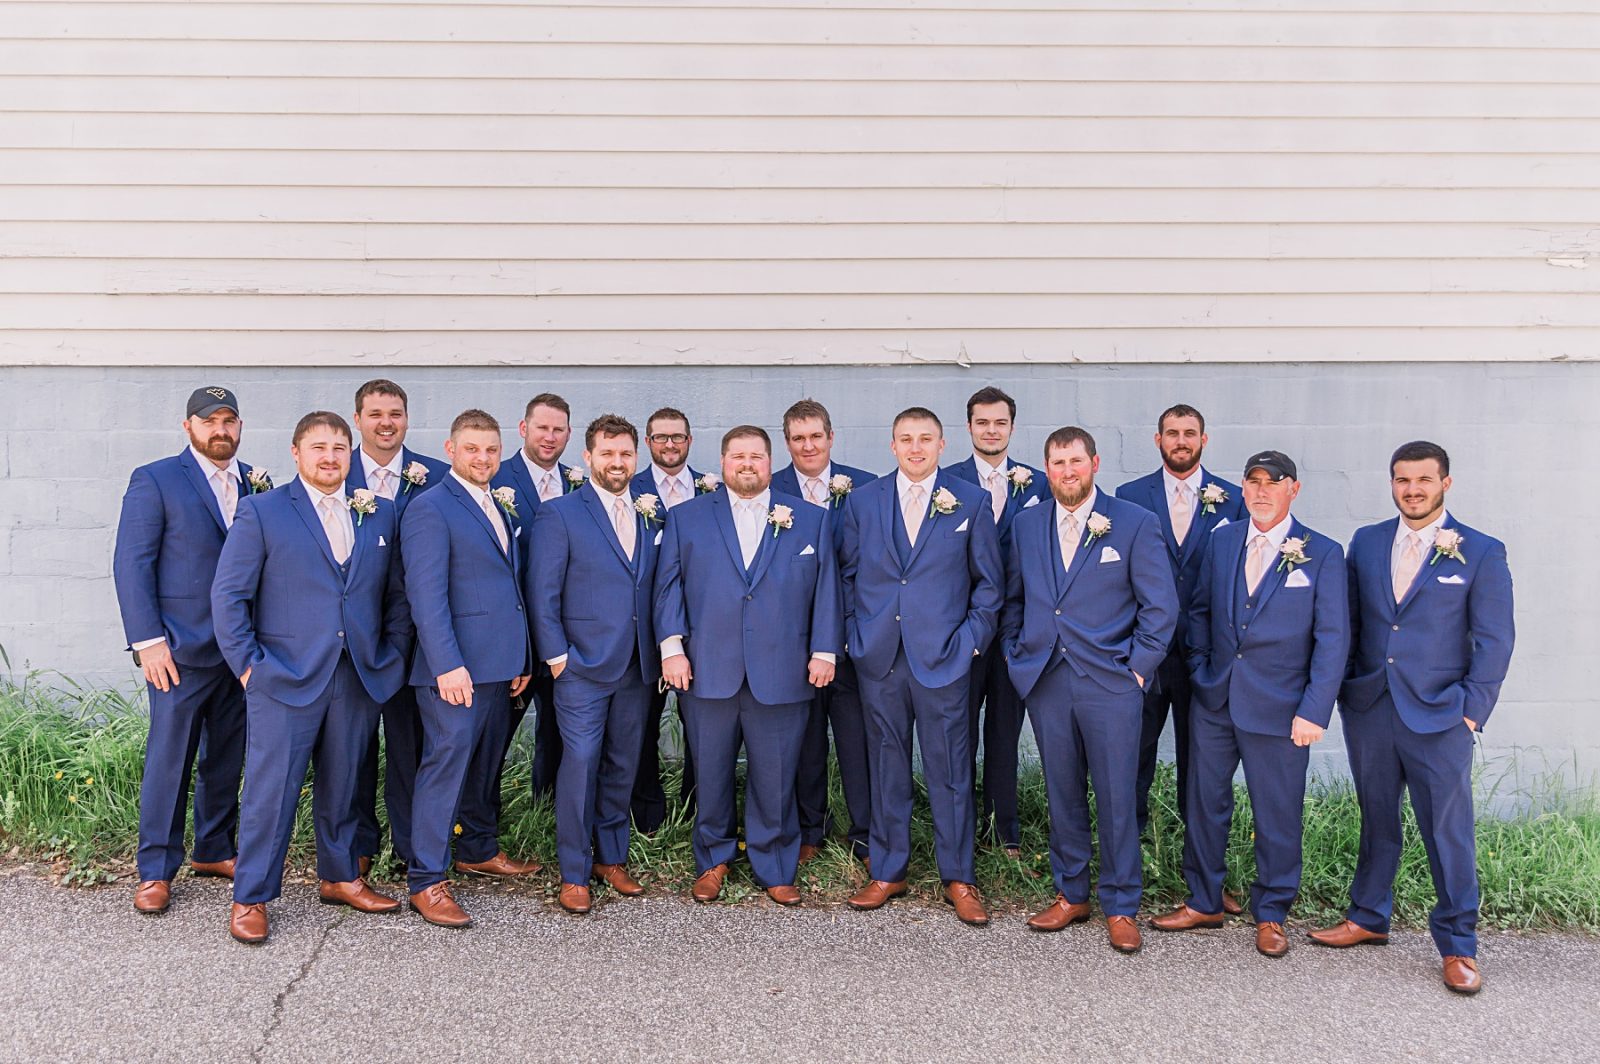 Wedding photography by Diana Gramlich, Groom with Groomsmen in navy blue suits and brown shoes